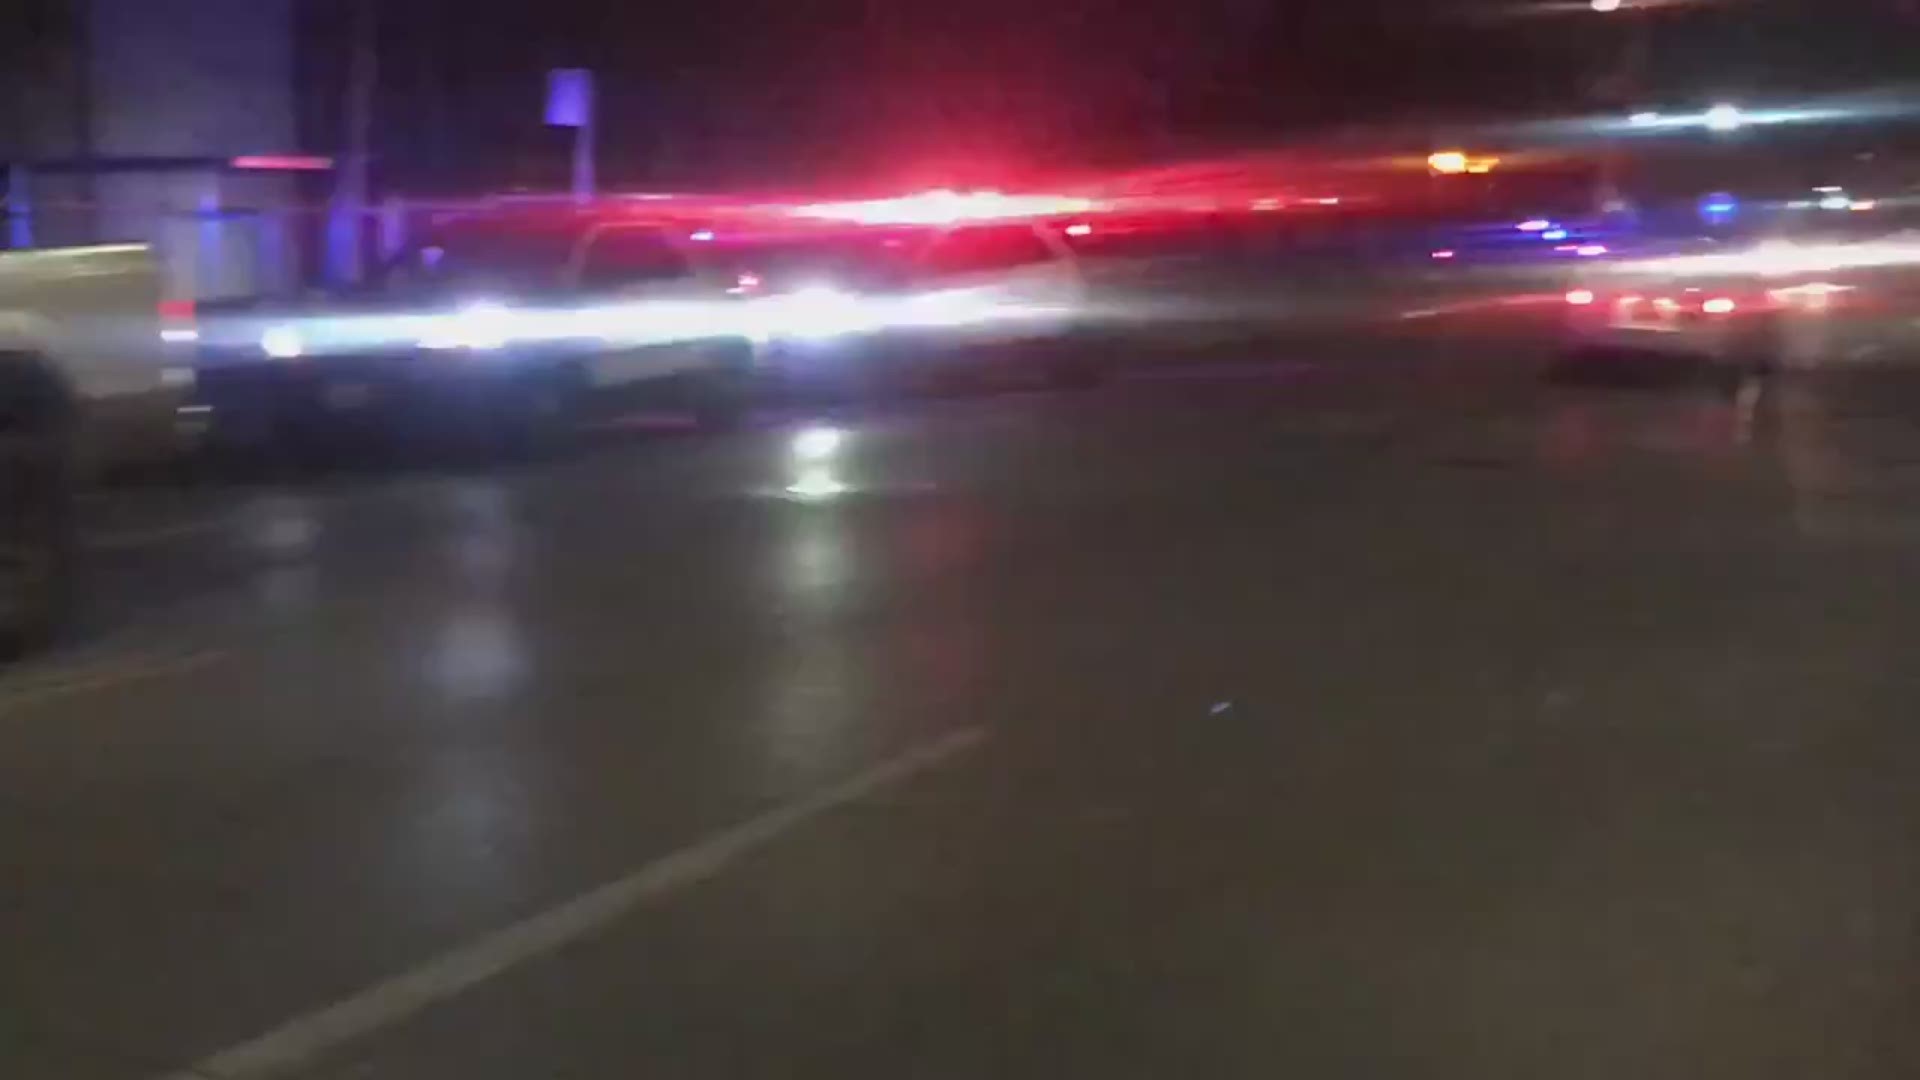 Police lights light up the street where a Houston police officer was shot and killed Saturday night.